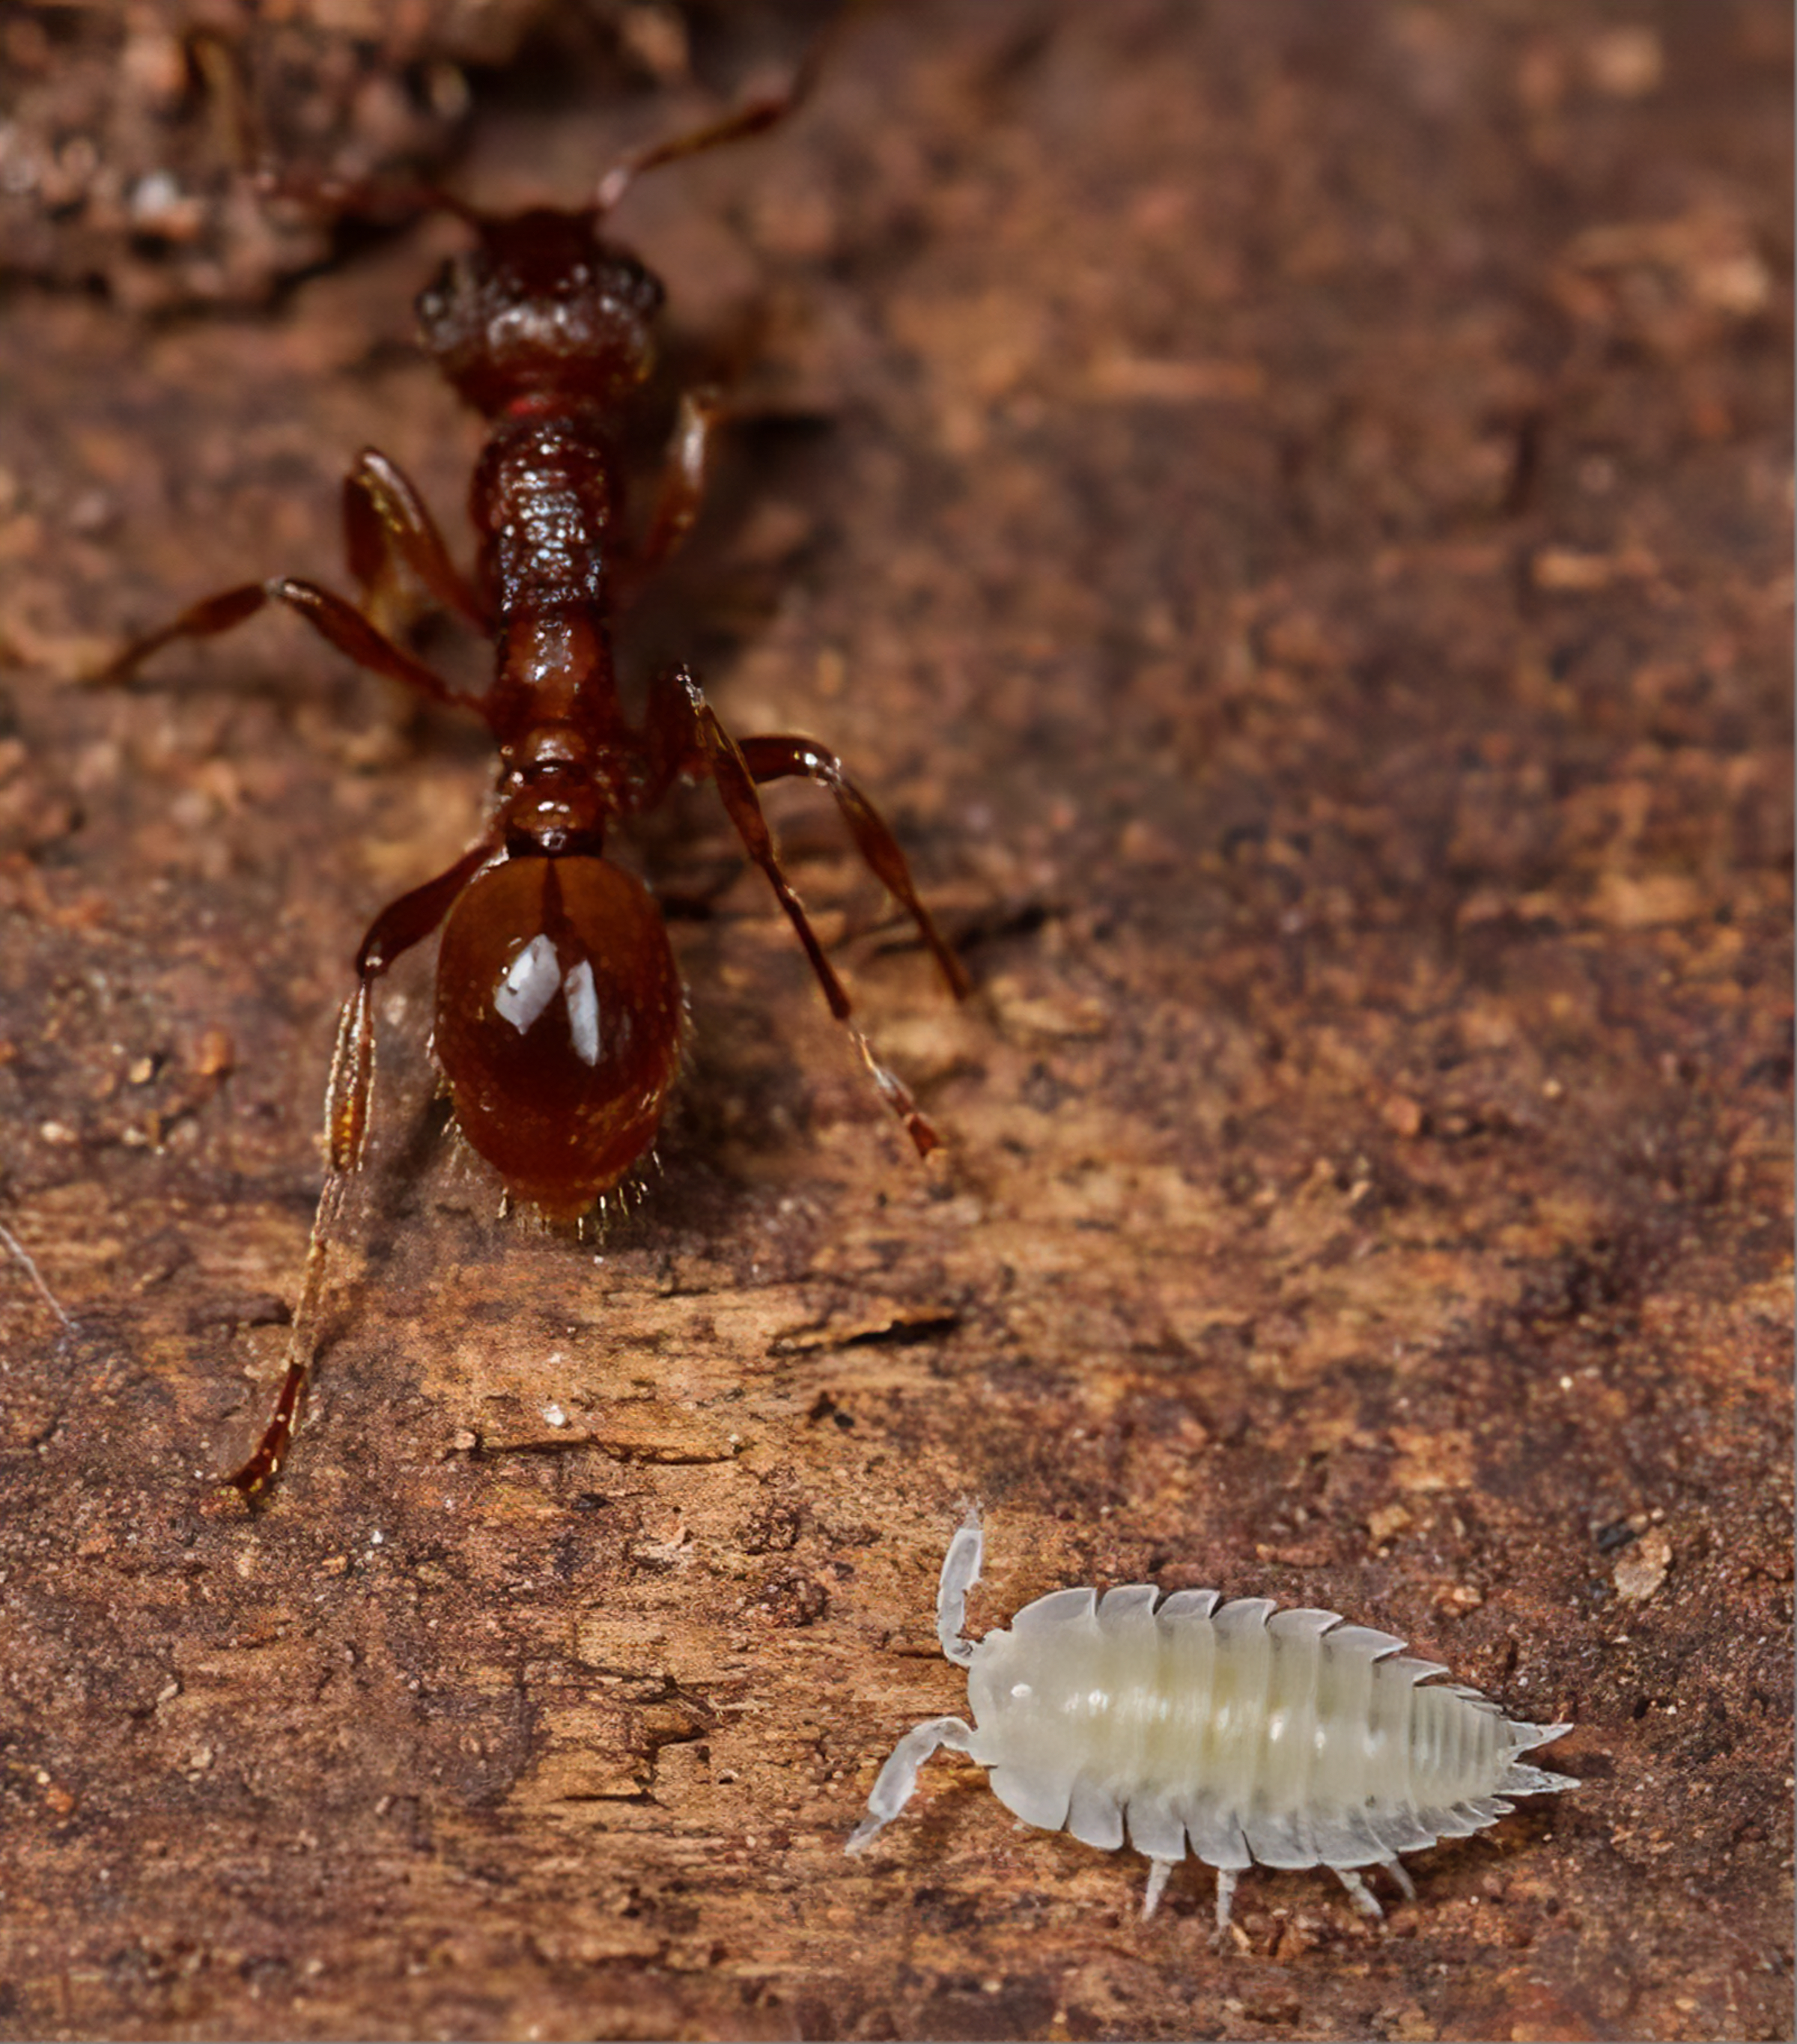 Ant and Woodlouse